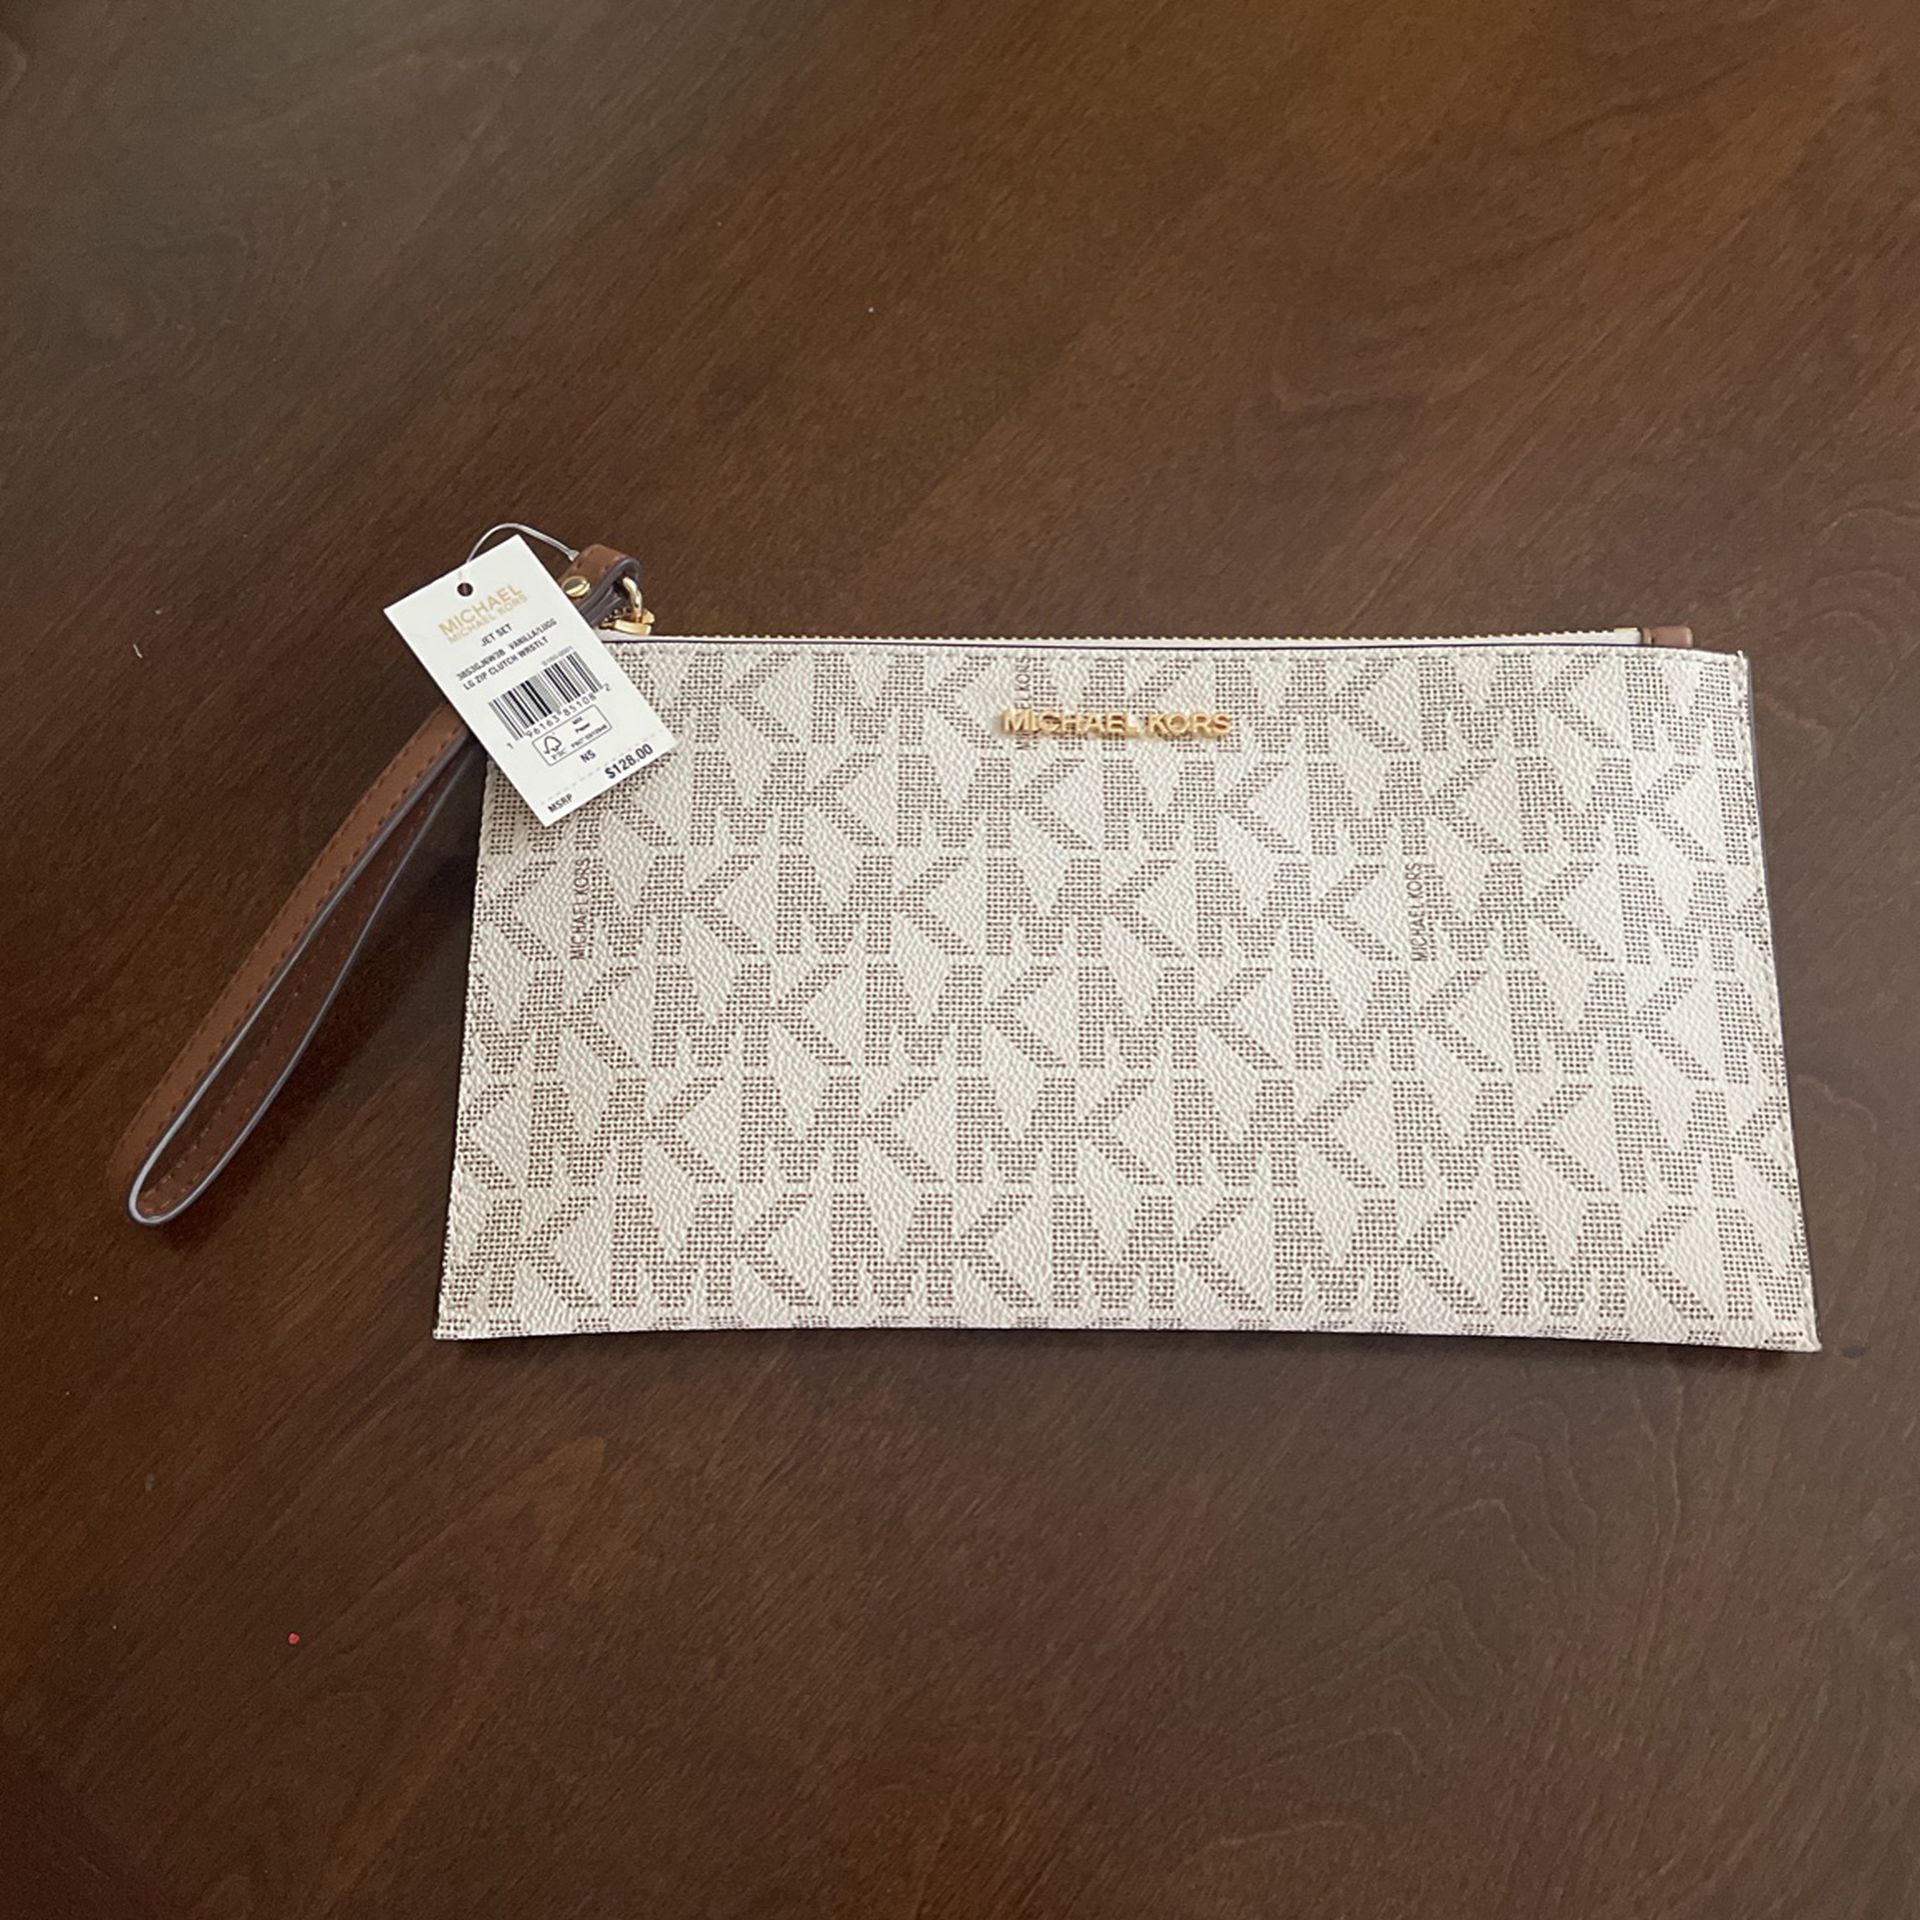 Michael Kors Voyager Tote - Vanilla for Sale in Guthrie, OK - OfferUp